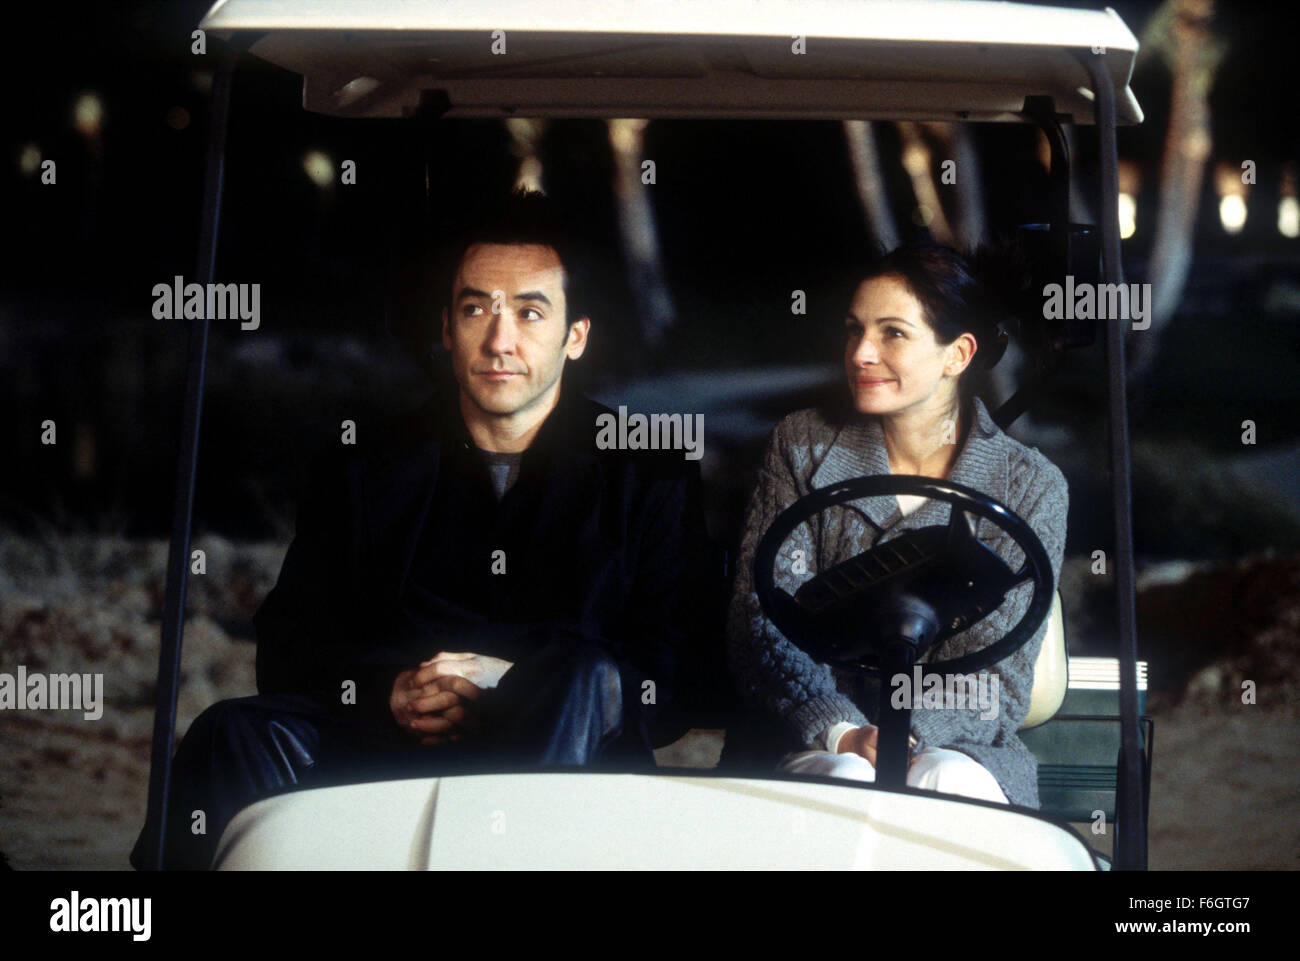 Feb 12, 2001; Hollywood, CA, USA; JOHN CUSACK stars as Eddie Thomas, a famous movie star that falls in love with his wifes sister, JULIA ROBERTS (starring as Kathleen 'Kiki' Harrison) in the romantic comedy 'America's Sweethearts' directed by Joe Roth. Stock Photo